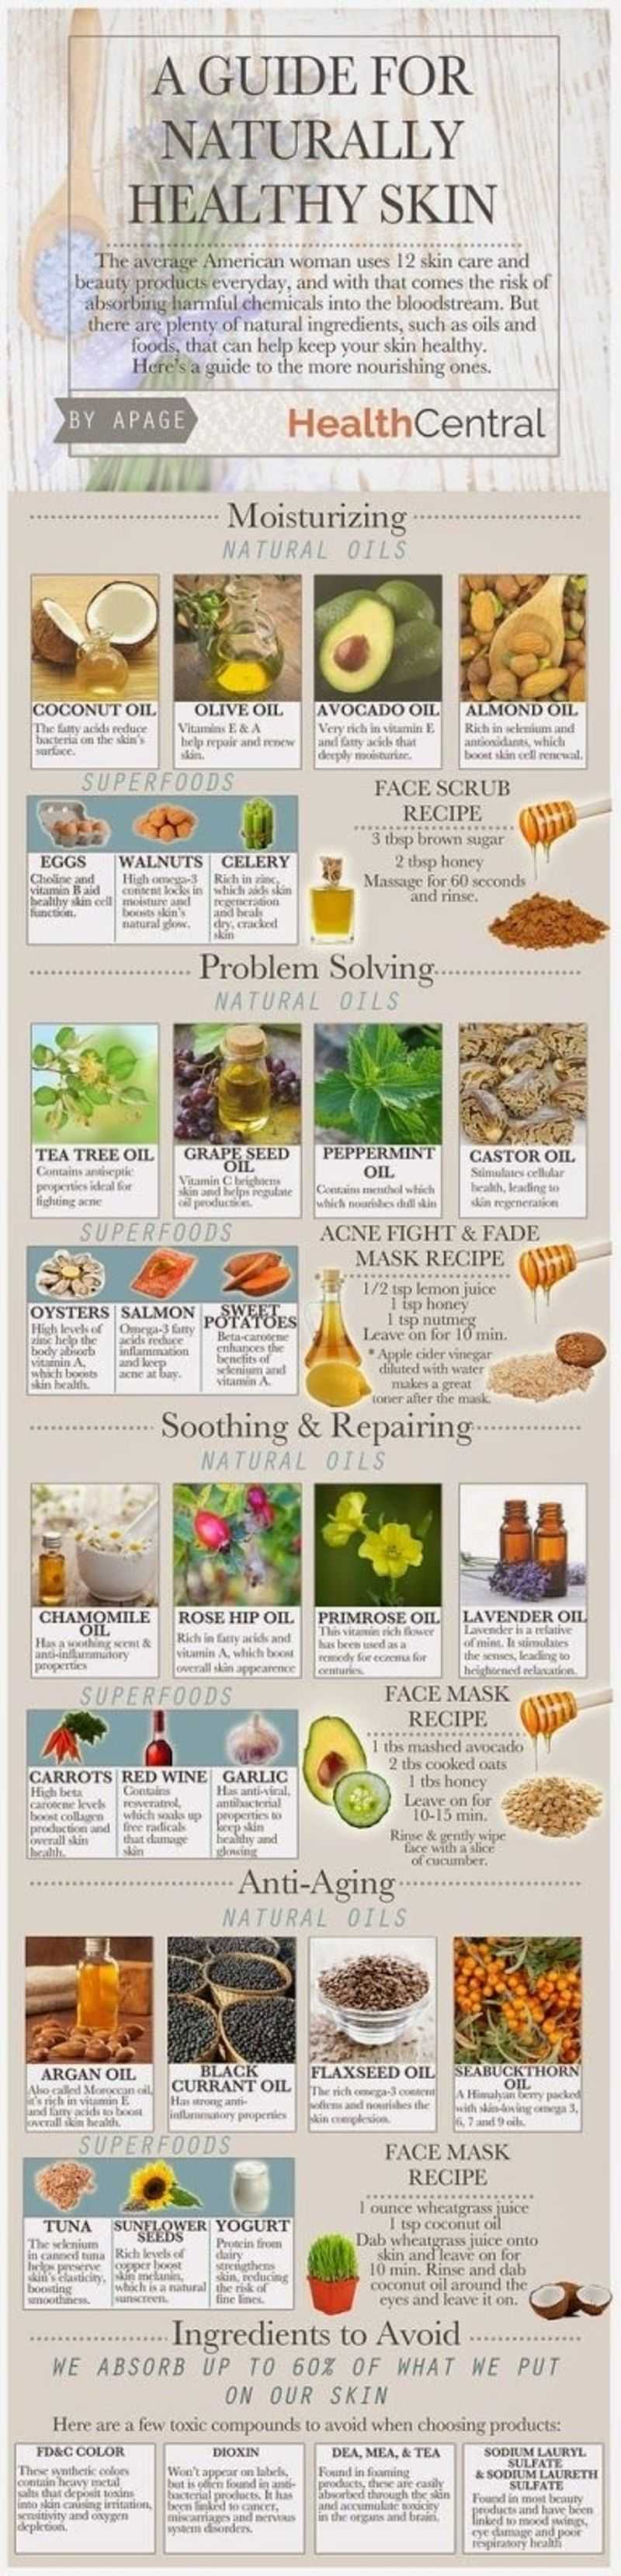 A Guide For Naturally Healthy Skin